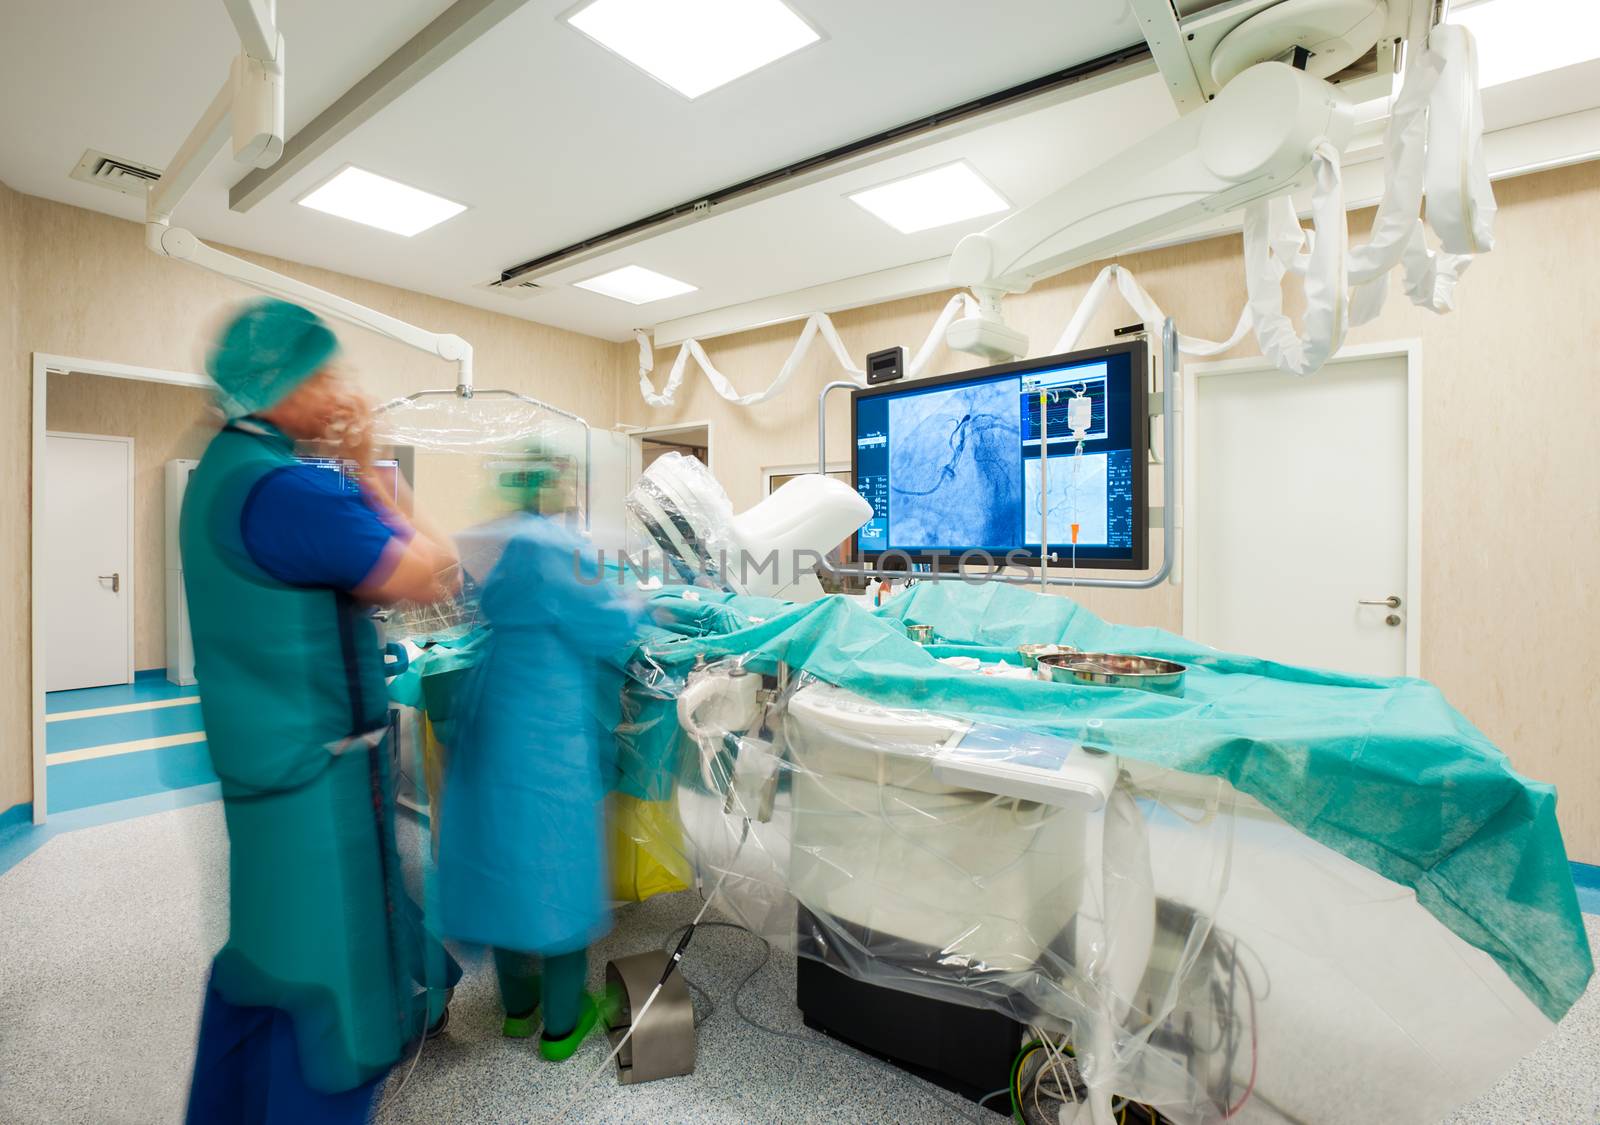 Blurred figures of surgeons during laparoscopic heart surgery in modern hospital.